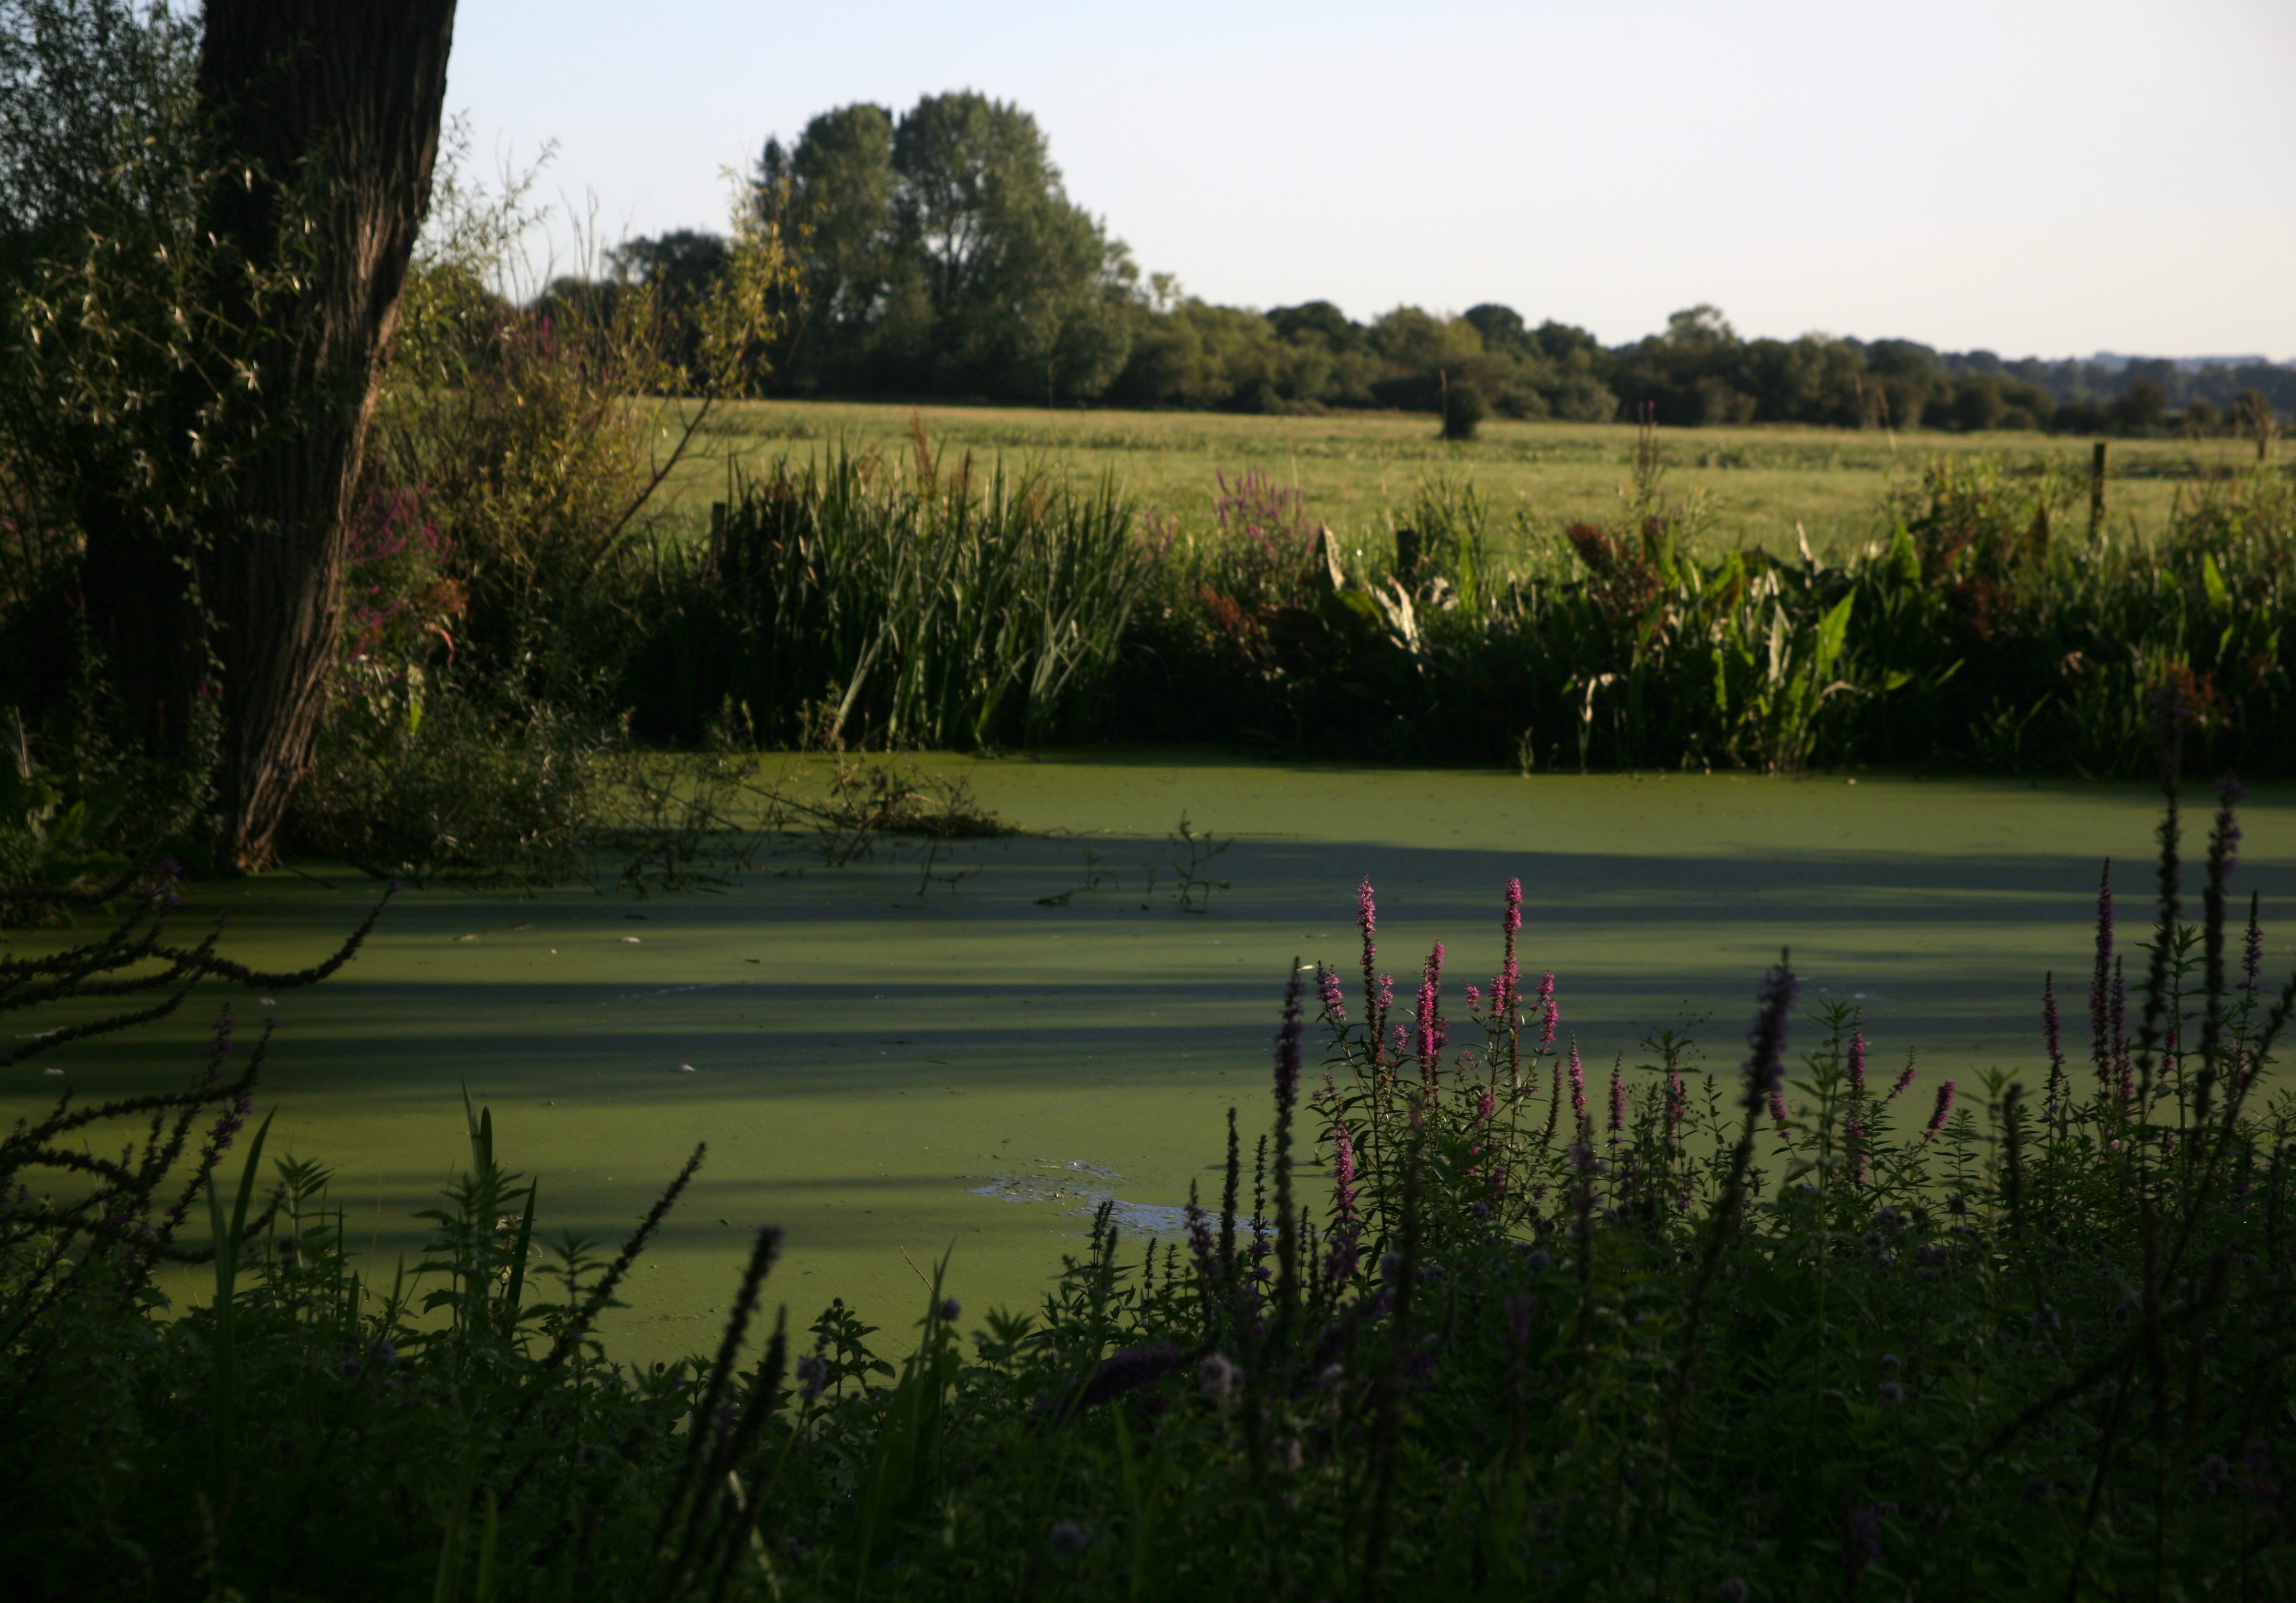 A green pond surrounded by grasses and a tree